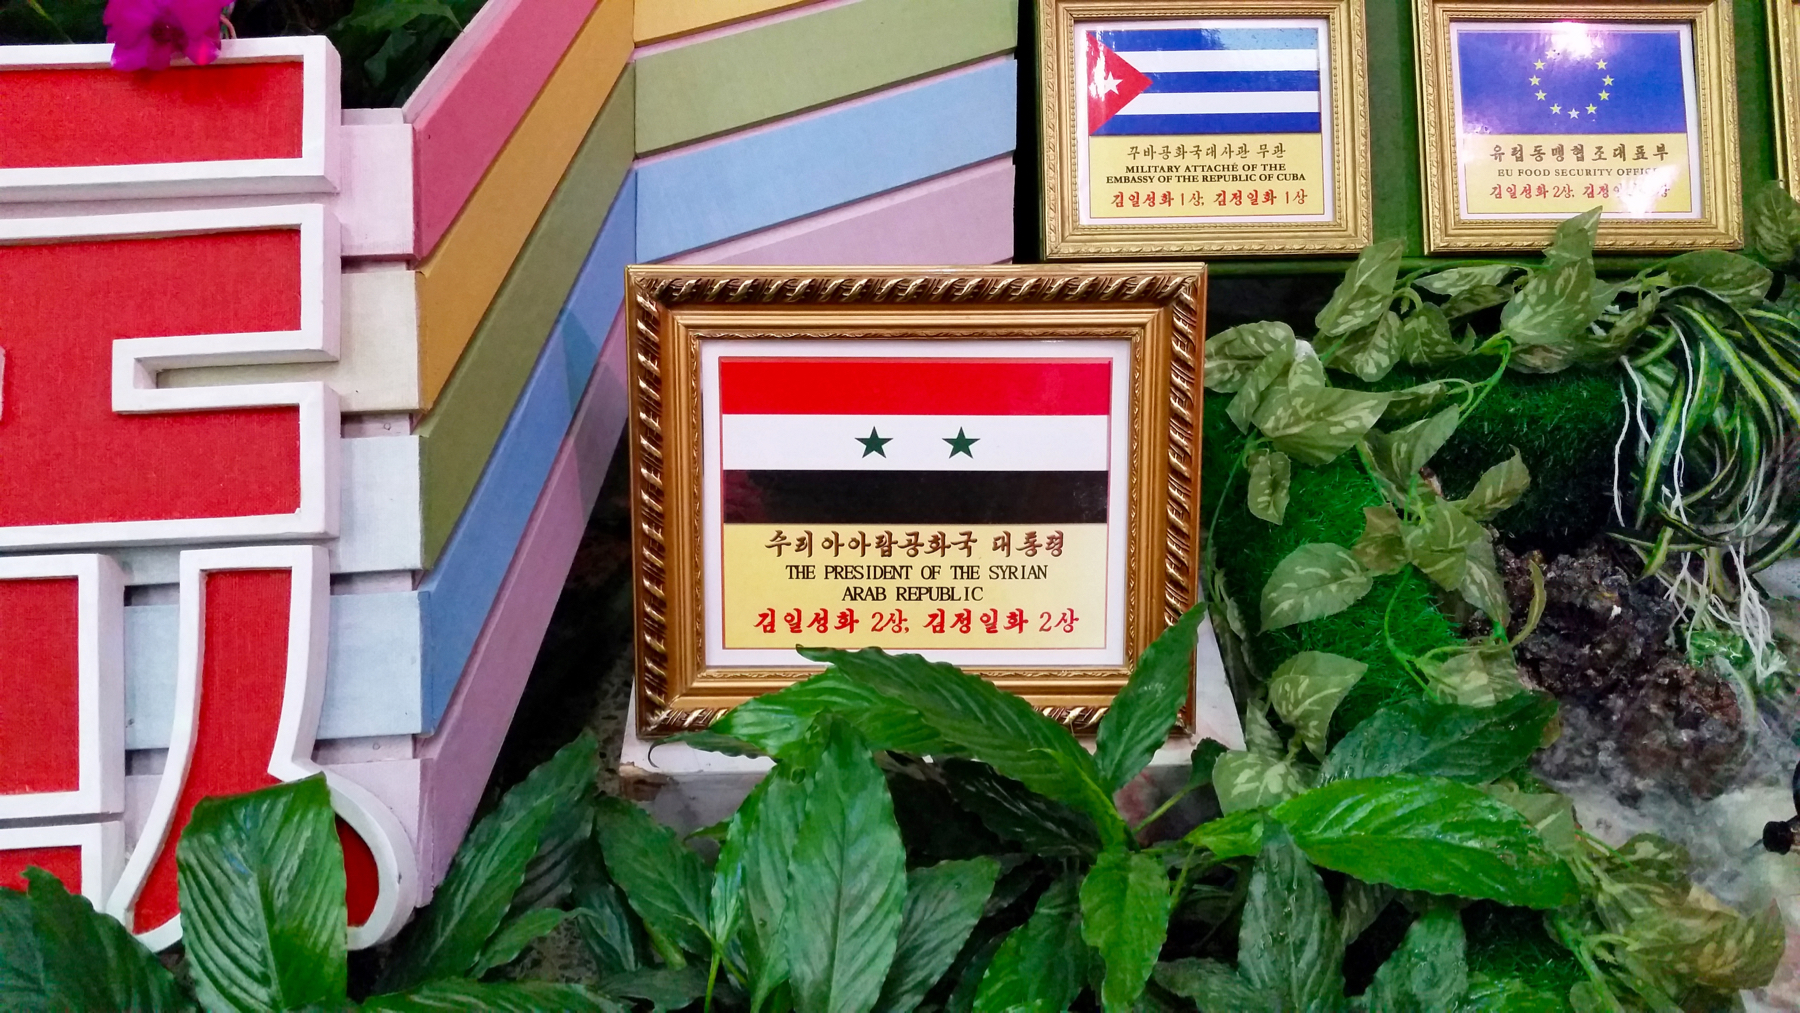 One exhibit featured flags from various countries and international organisations such as this one from the Syrian President's Office, placed weirdly close to the Cuban flag and the EU food security office's EU flag. The mind boggles.